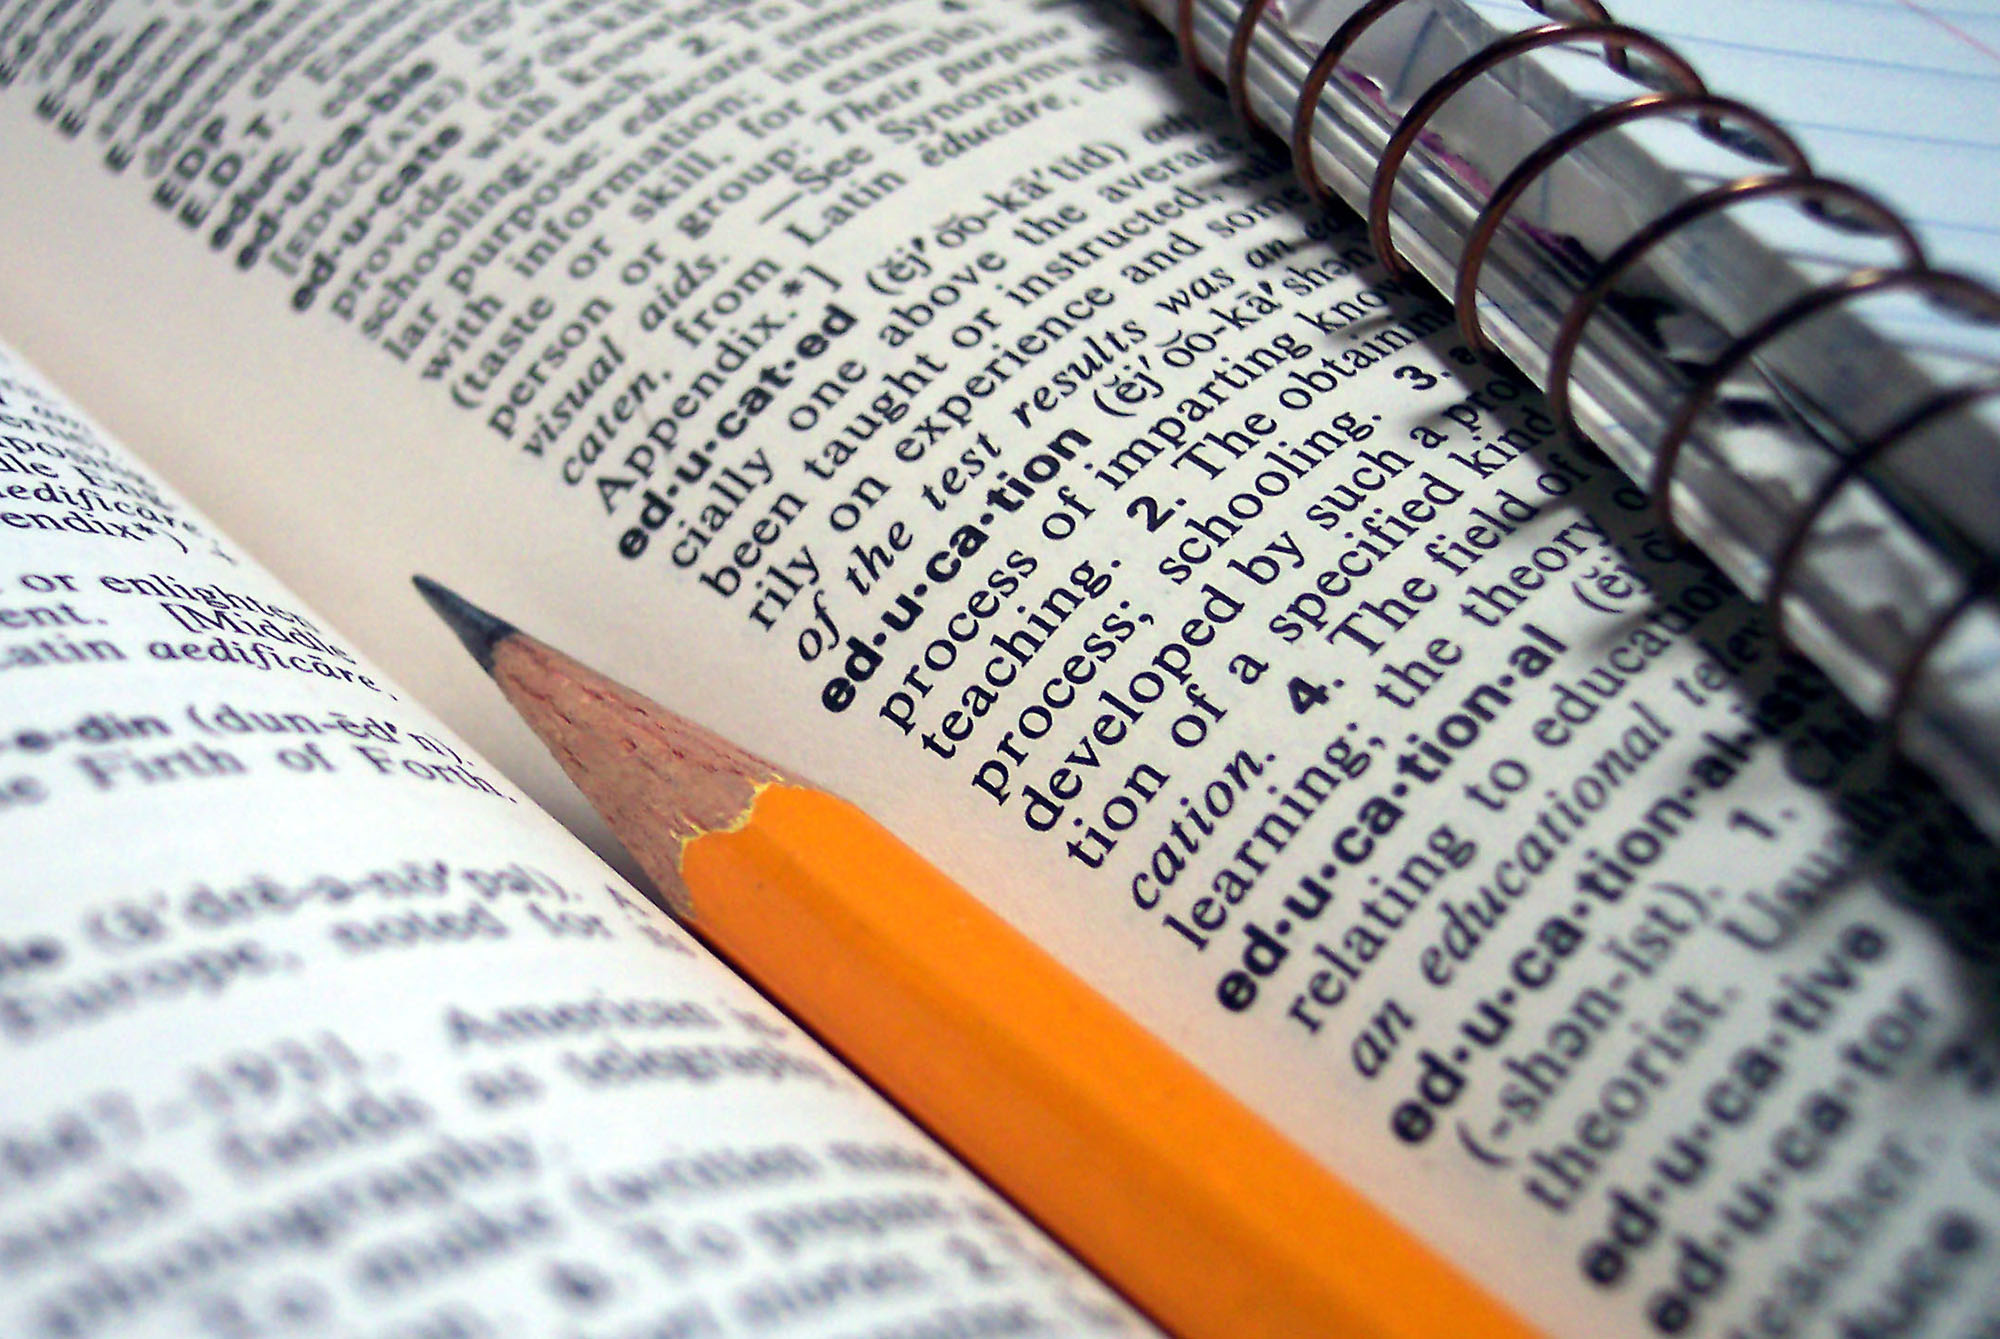 Stock photo of a pencil and notebook laying in a dictionary opened to the entry on education.